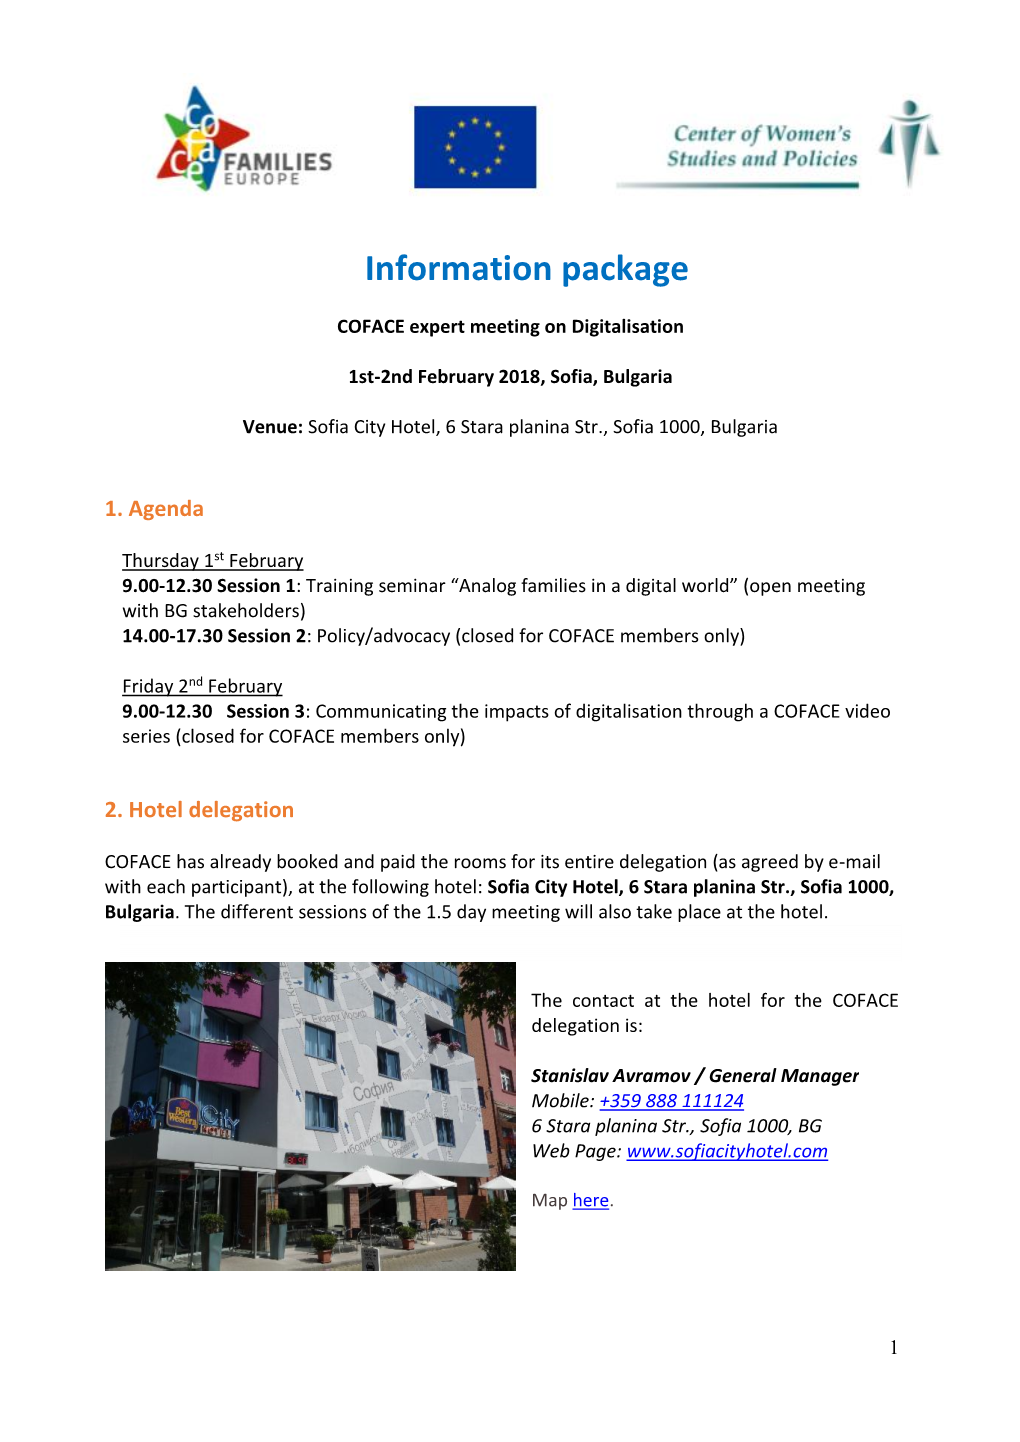 Information Package